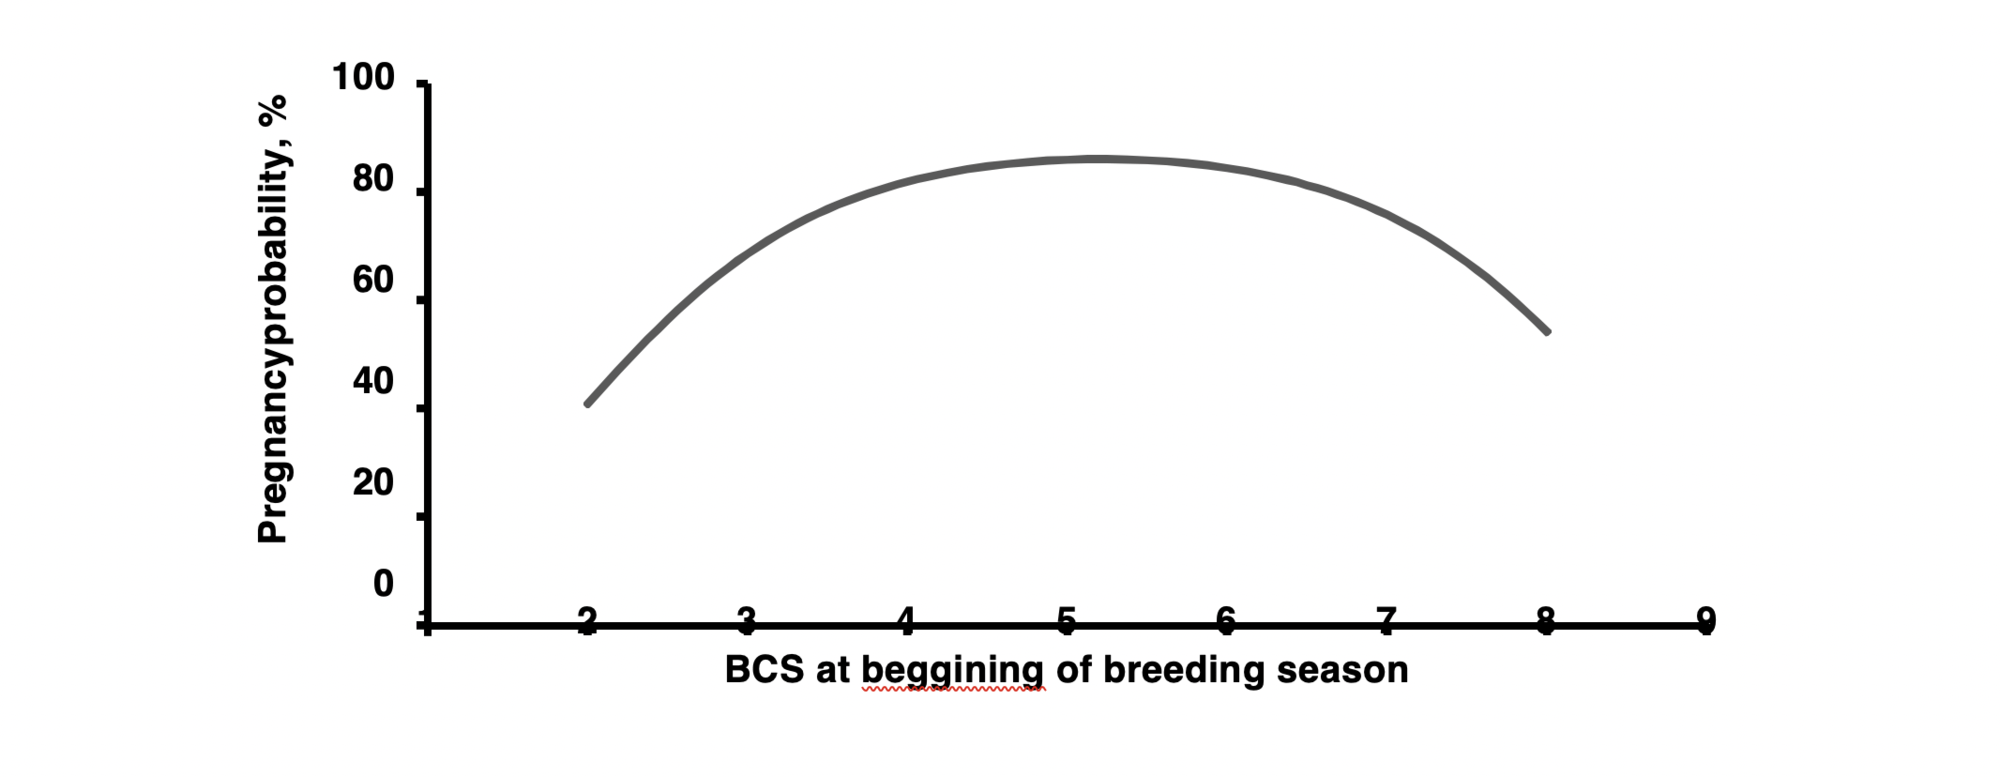 graph of pregnancy probability vs. body condition score at the beginning of breeding season